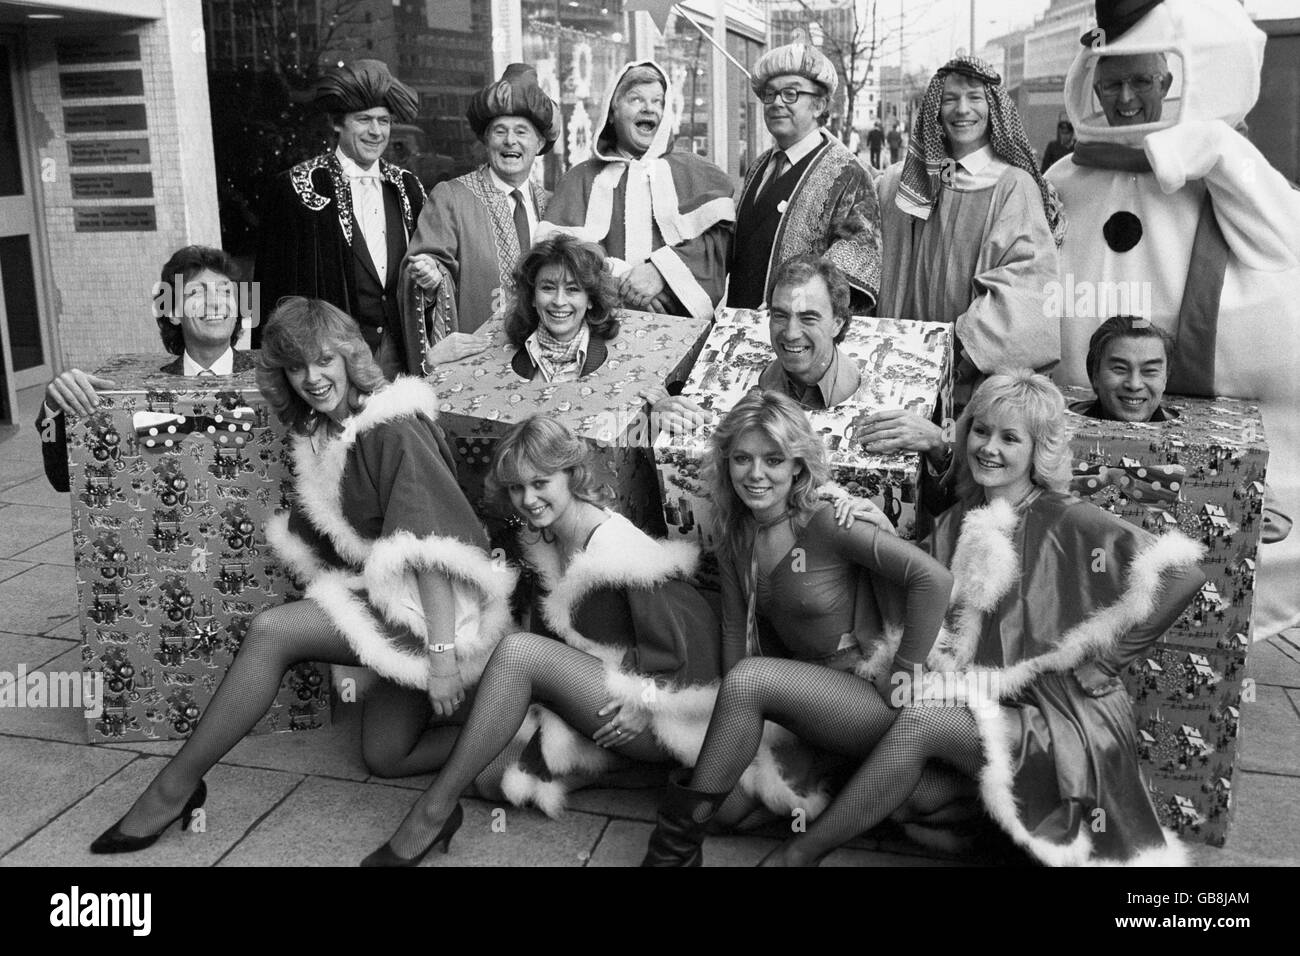 A gathering of Christmas TV stars from the holiday weekend on Thames TV. (back row l-r) Impressionist Mike Yarwood, comedians Ernie Wise, Benny Hill, Eric Morcambe and Jim Davidson. Also Weatherman Jack Scott. (middle row l-r) Singer Tony Monopoly, actress Nanette Newman, comedian Bernie Clifton and actor Bert Kwouk. (front row l-r) Hill's Angels Lesley Wood, Anita Ray, Lindsay Neil and Sue Upton. Stock Photo